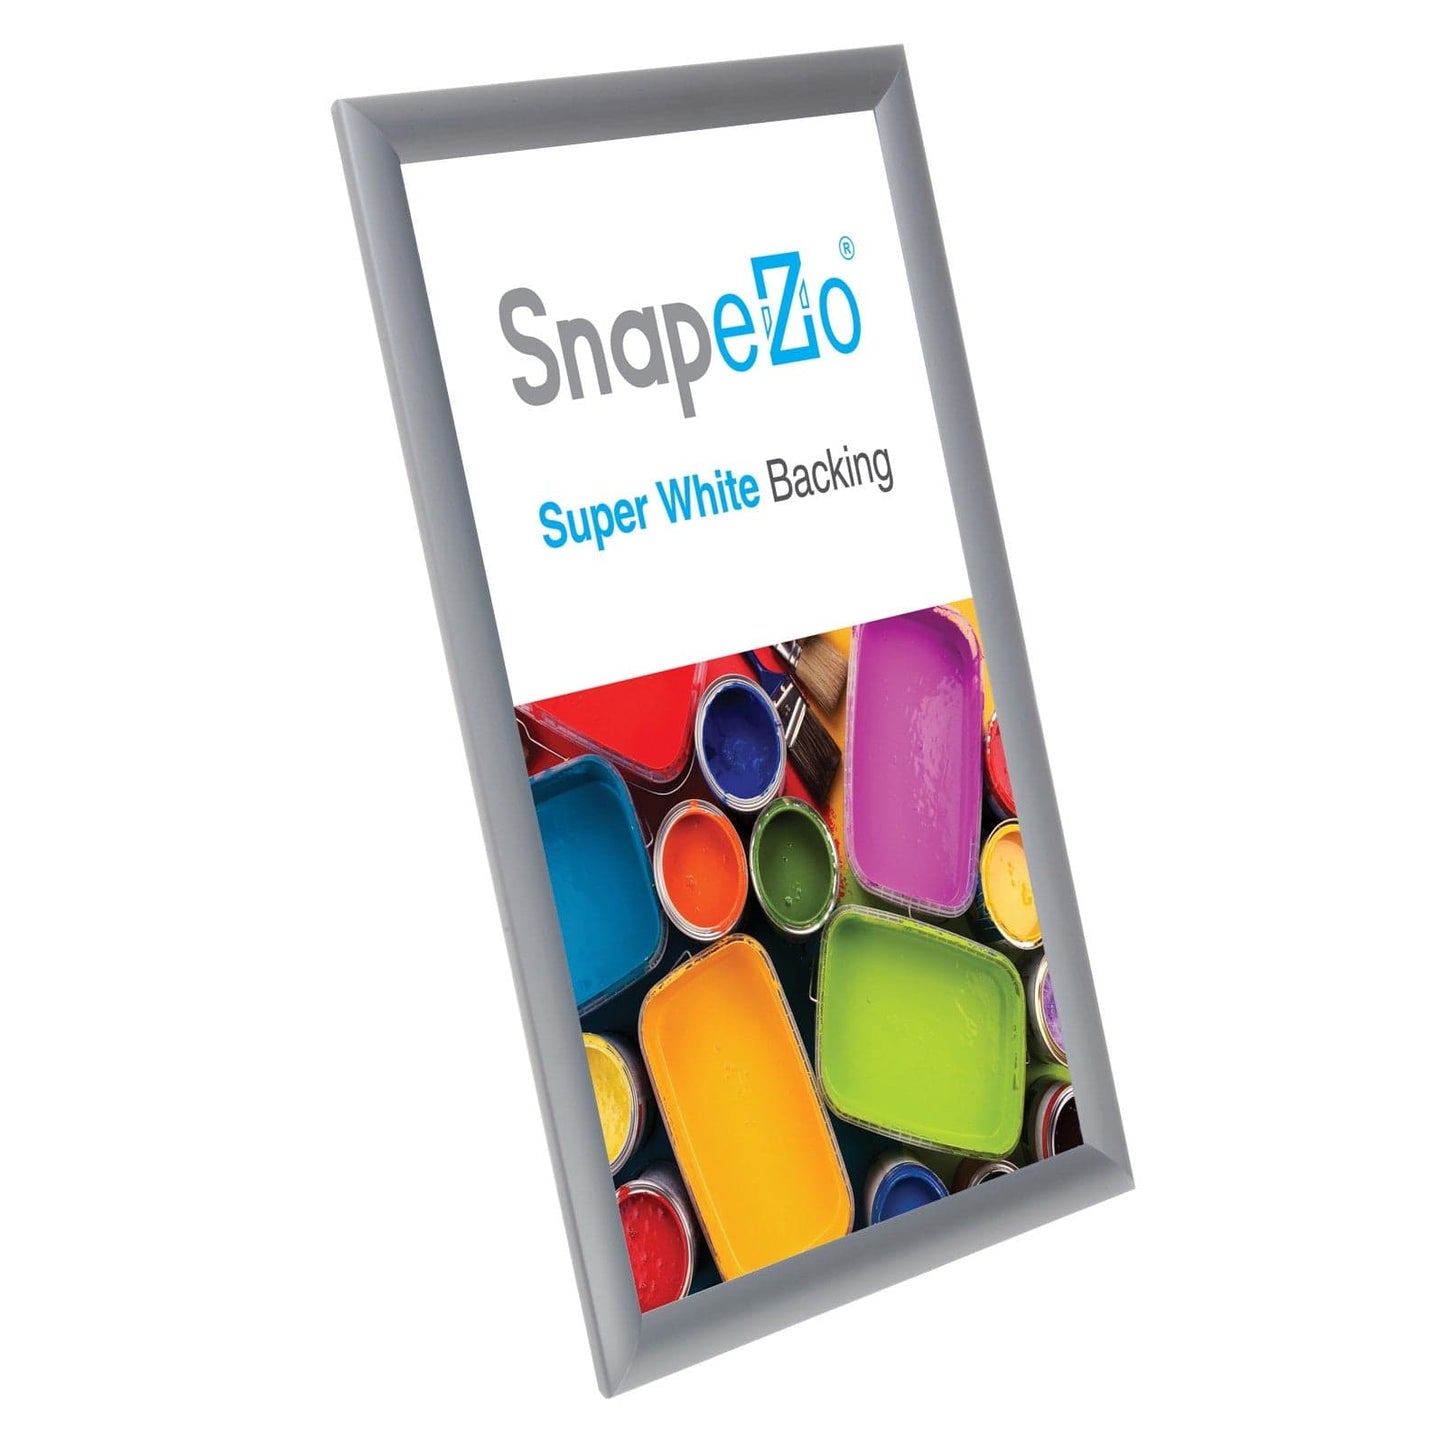 11x17 Silver SnapeZo® Poster Snap Frame 1" - Snap Frames Direct